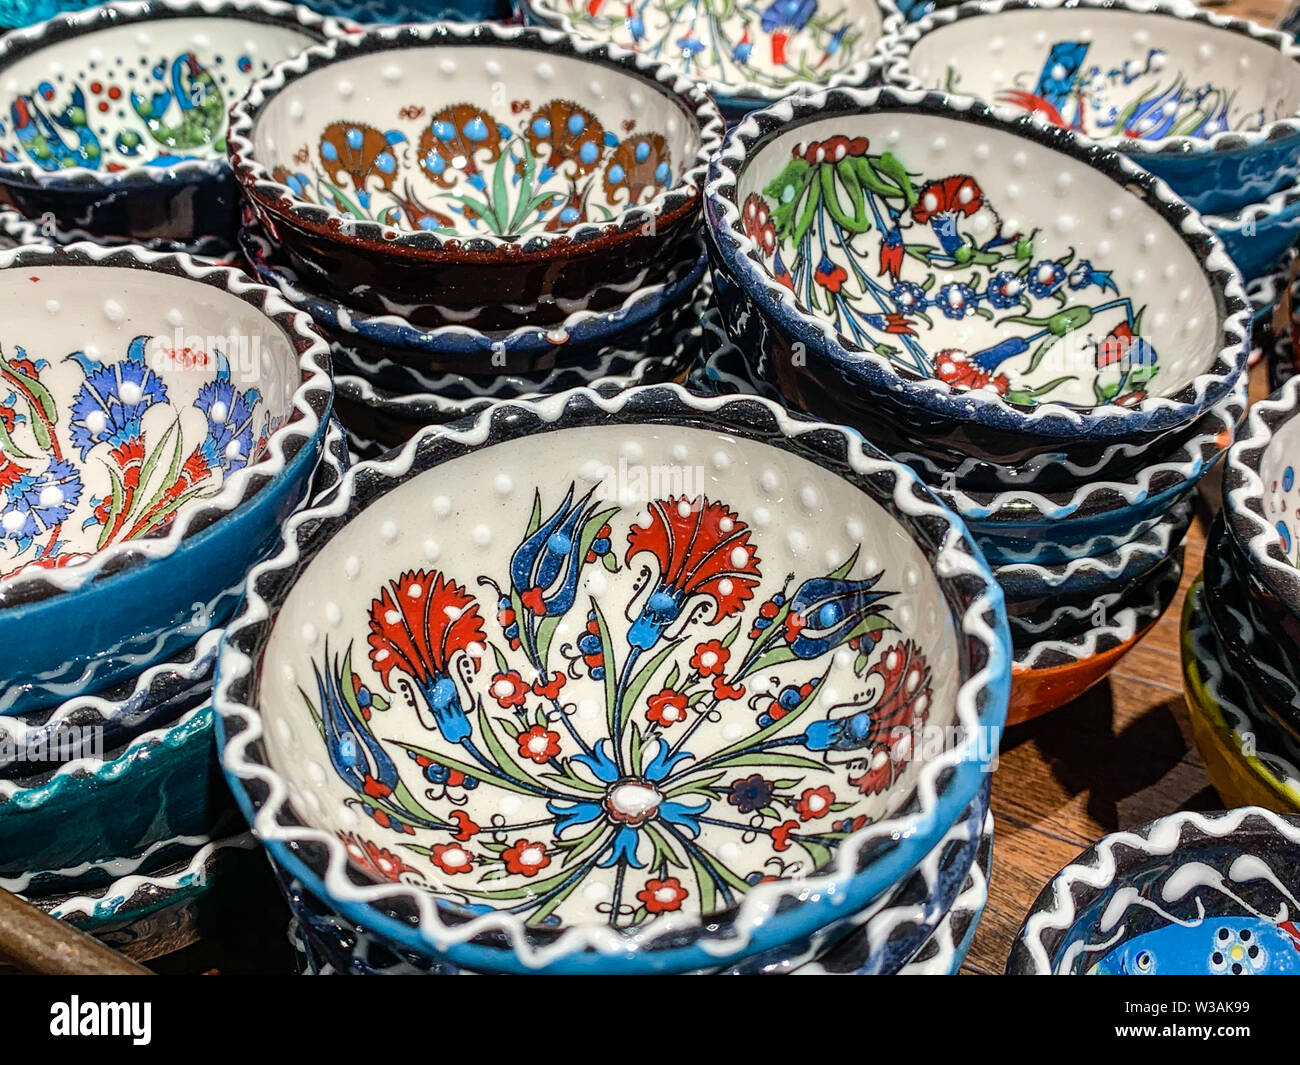 Typical ethnic porcelain bowls on sales with floral and ornamentic pattern. Traditional styled souvenir from Turkey. Stock Photo